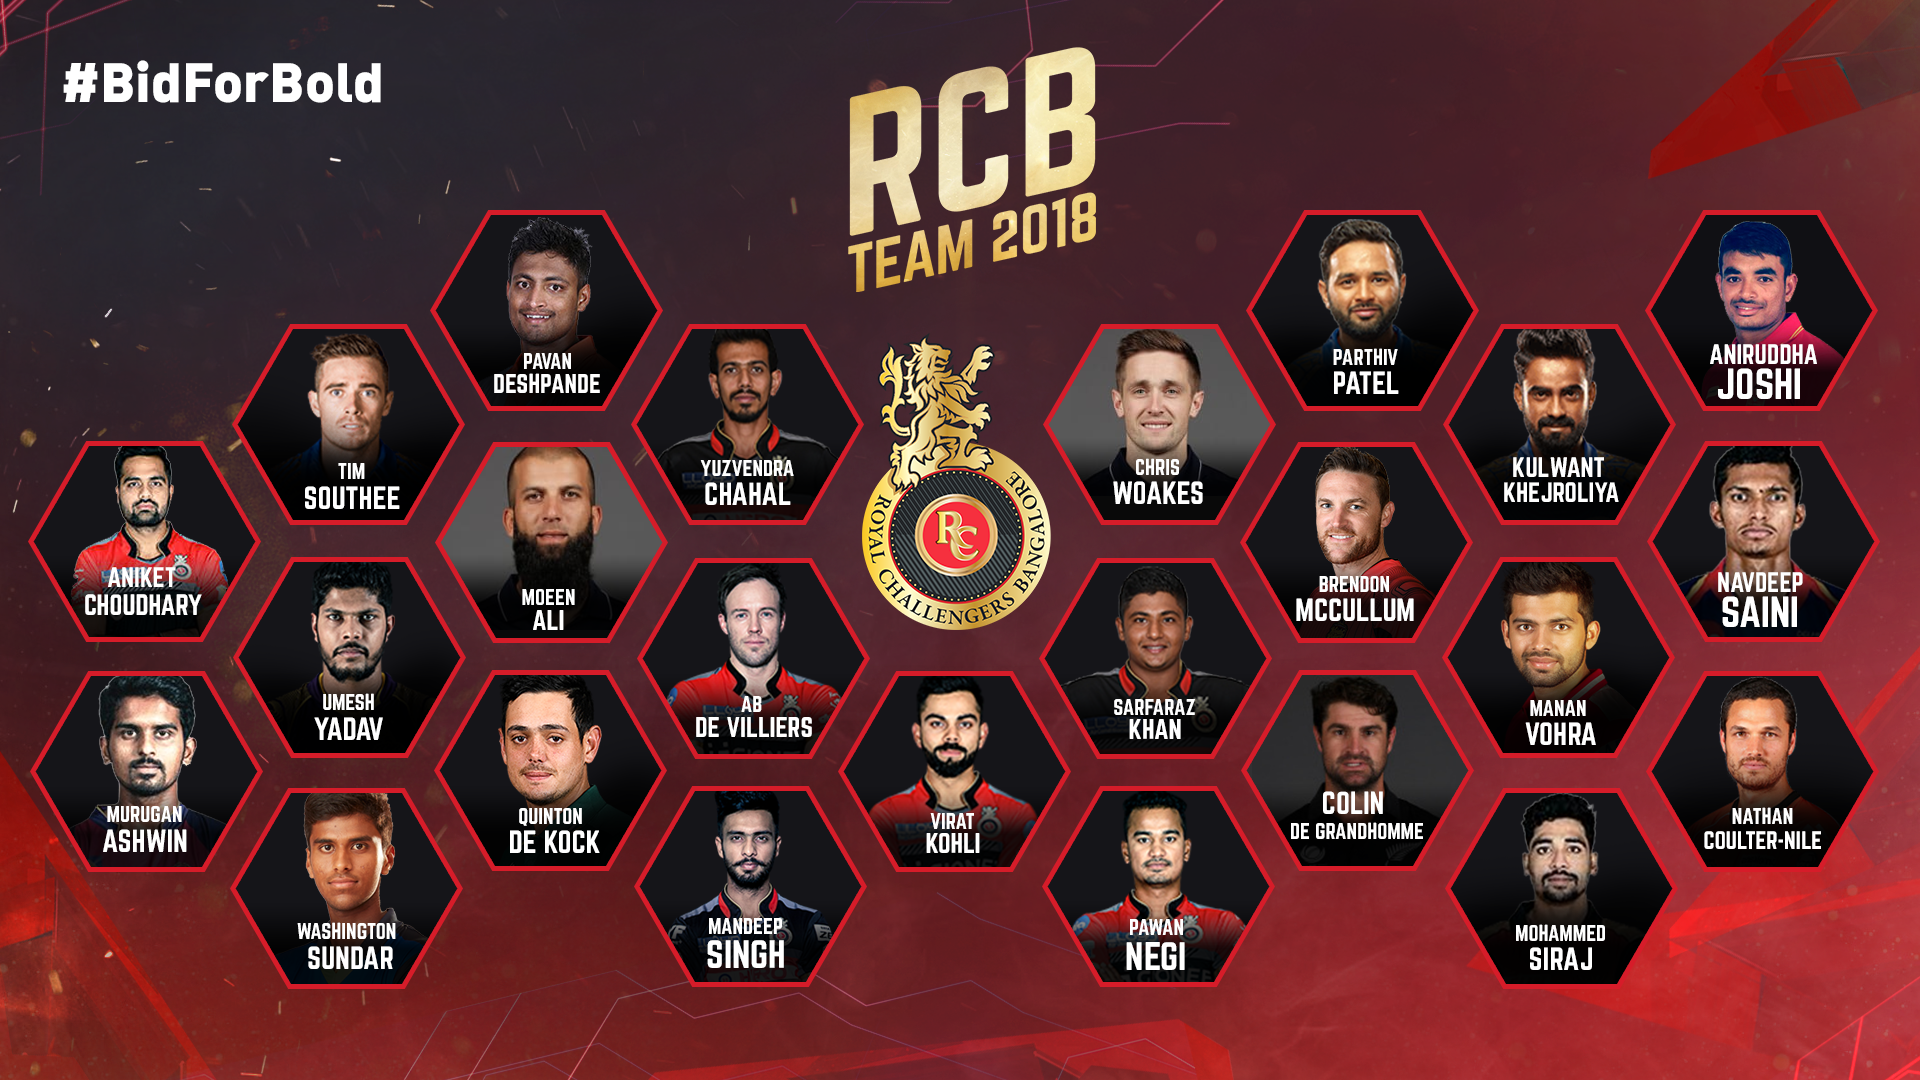 Rcb Logo Hd Wallpapers - Royal Challengers Bangalore Team 2018 , HD Wallpaper & Backgrounds